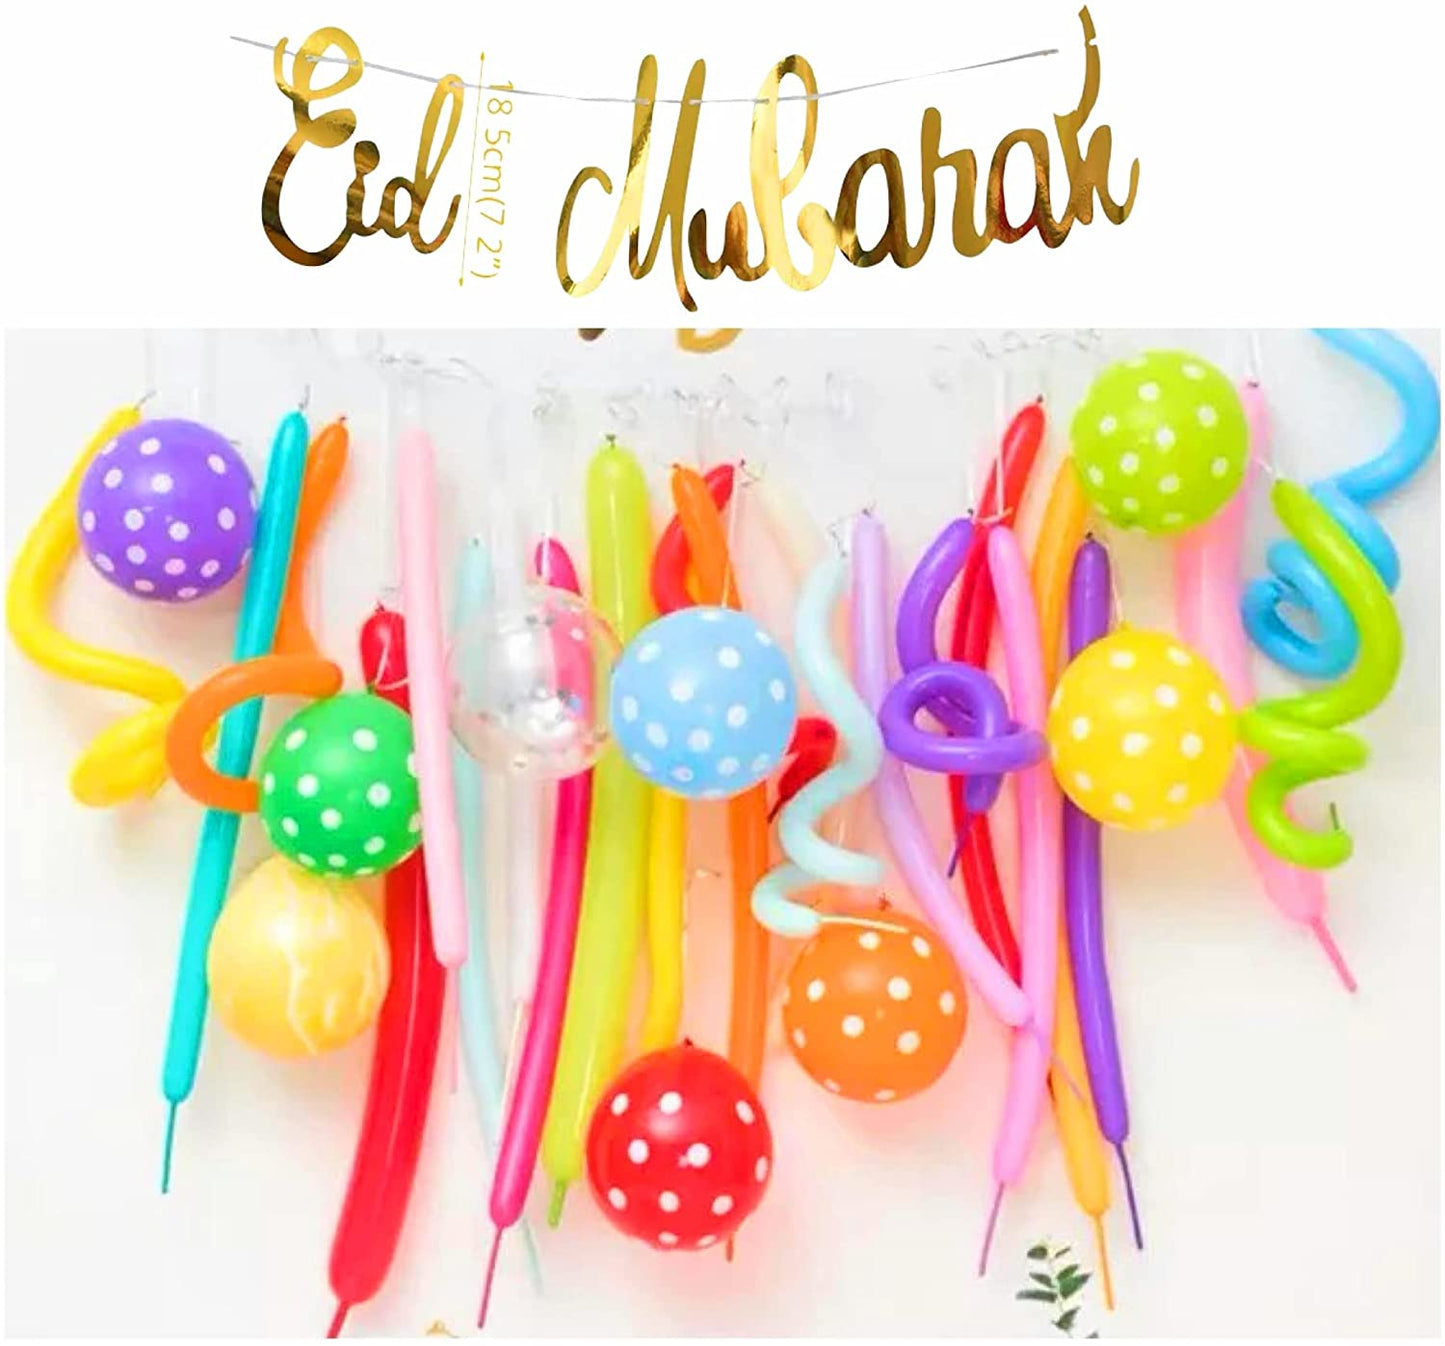 Eid Mubarak Balloon Colorful Garland kit with Eid Banner and Long Balloons Decoration Kit Party Supplies Balloon Set Party Theme Kits…